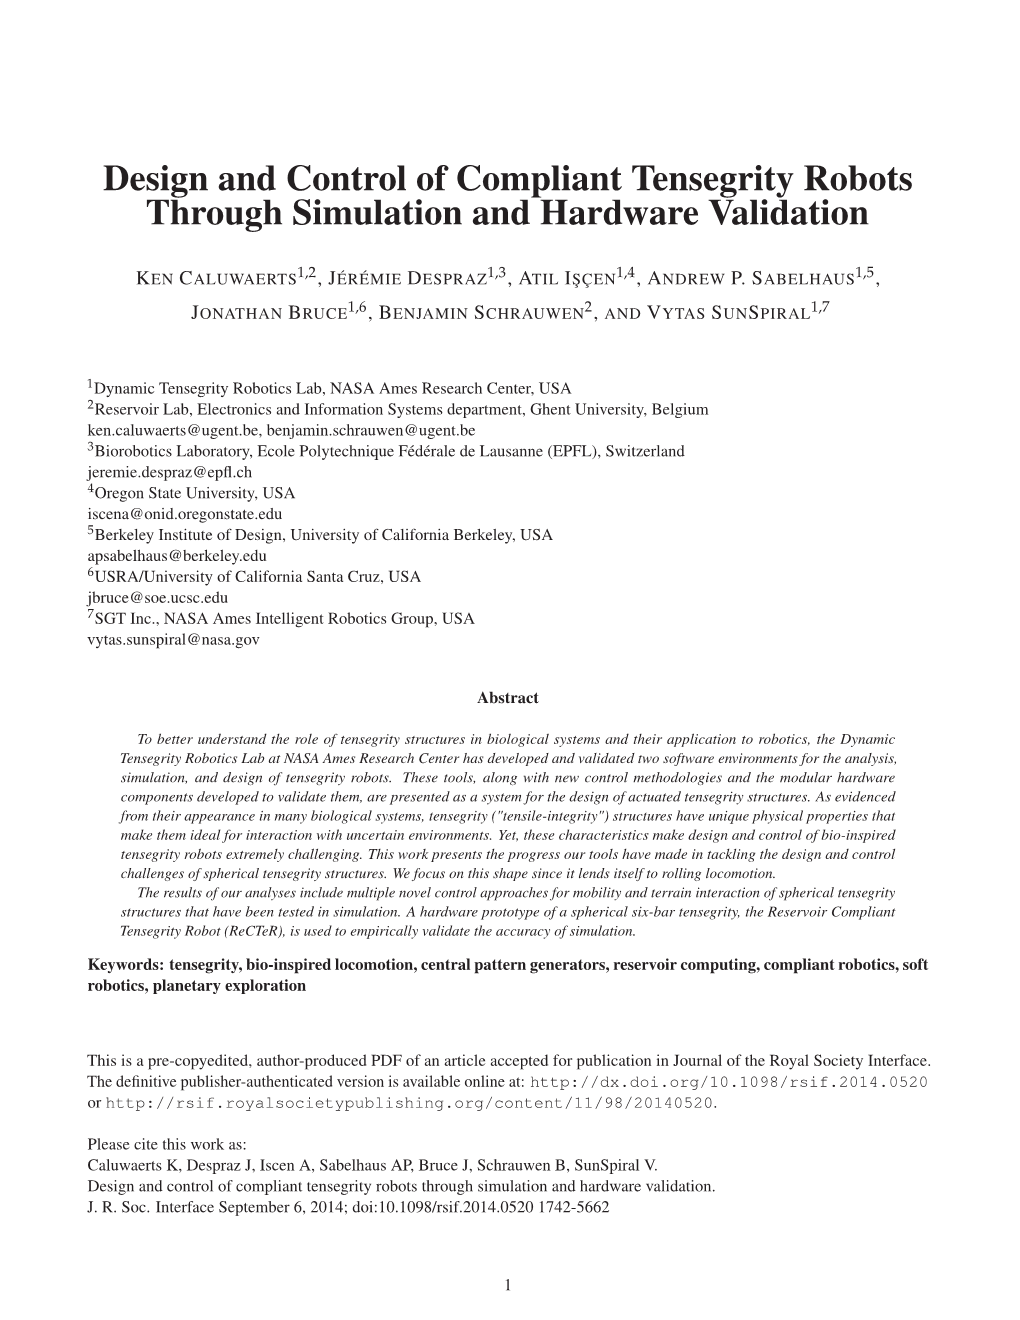 Design and Control of Compliant Tensegrity Robots Through Simulation and Hardware Validation